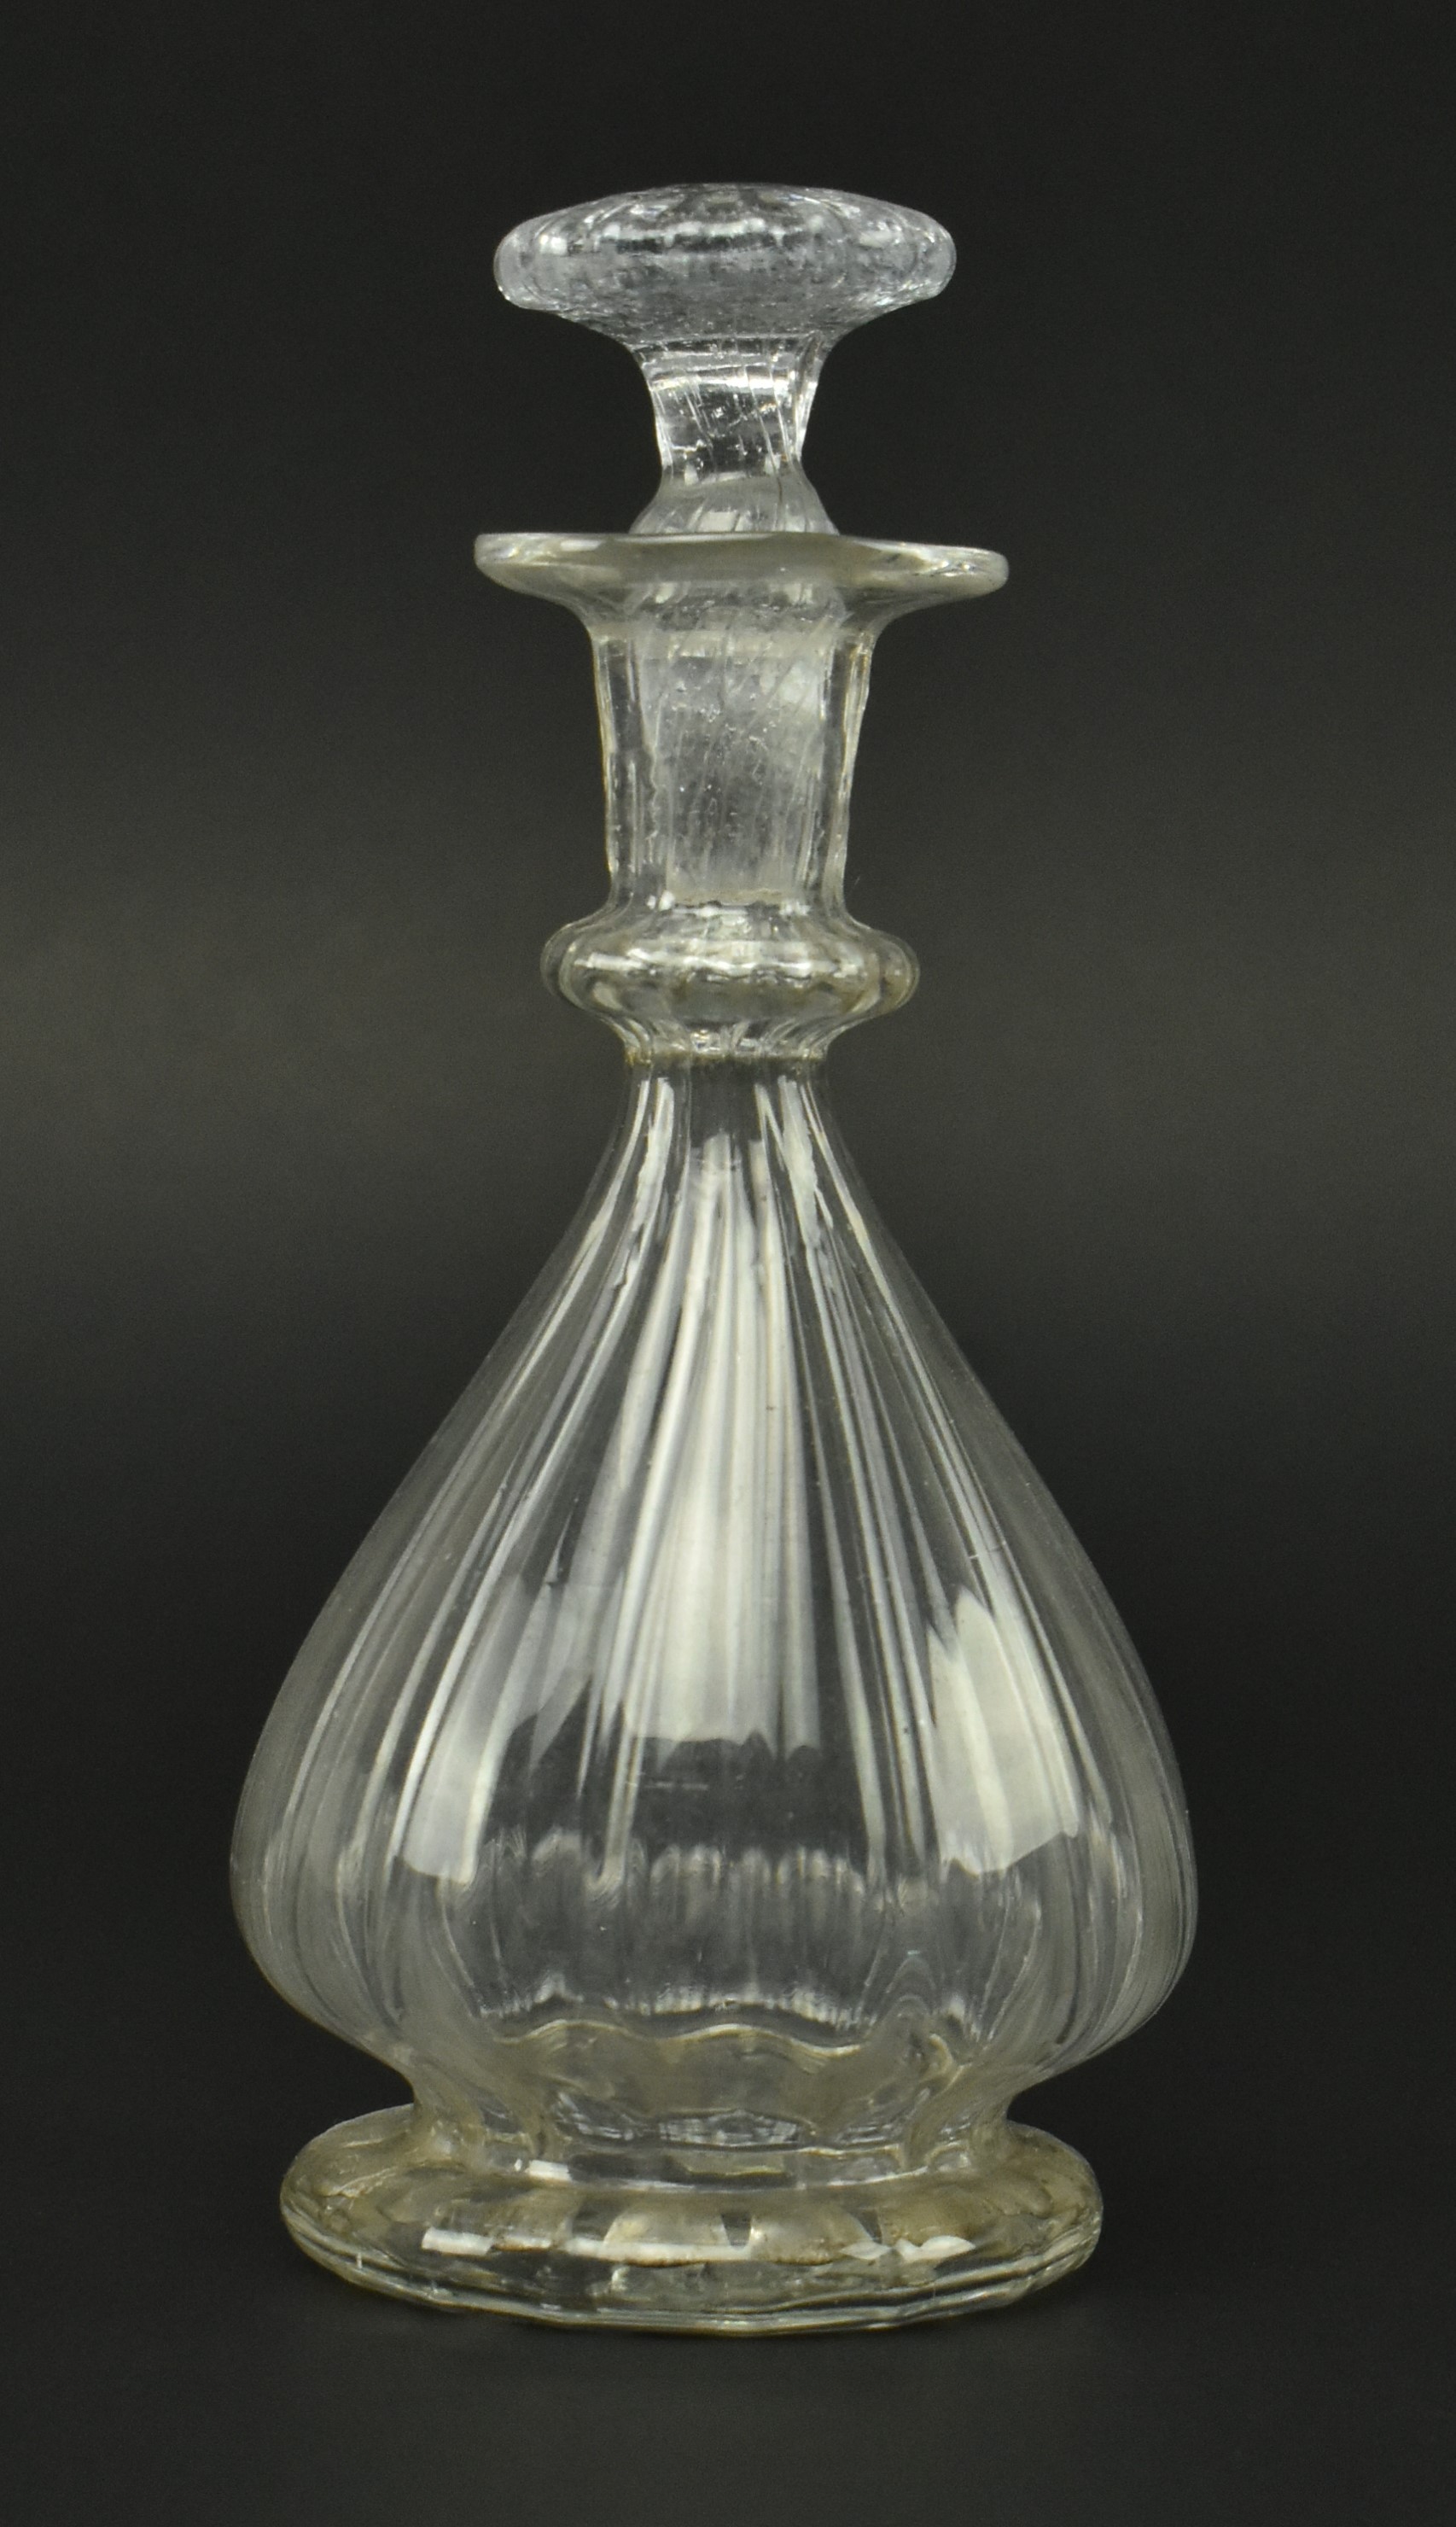 EARLY 19TH CENTURY RIBBED GLASS VIAL WITH STOPPER